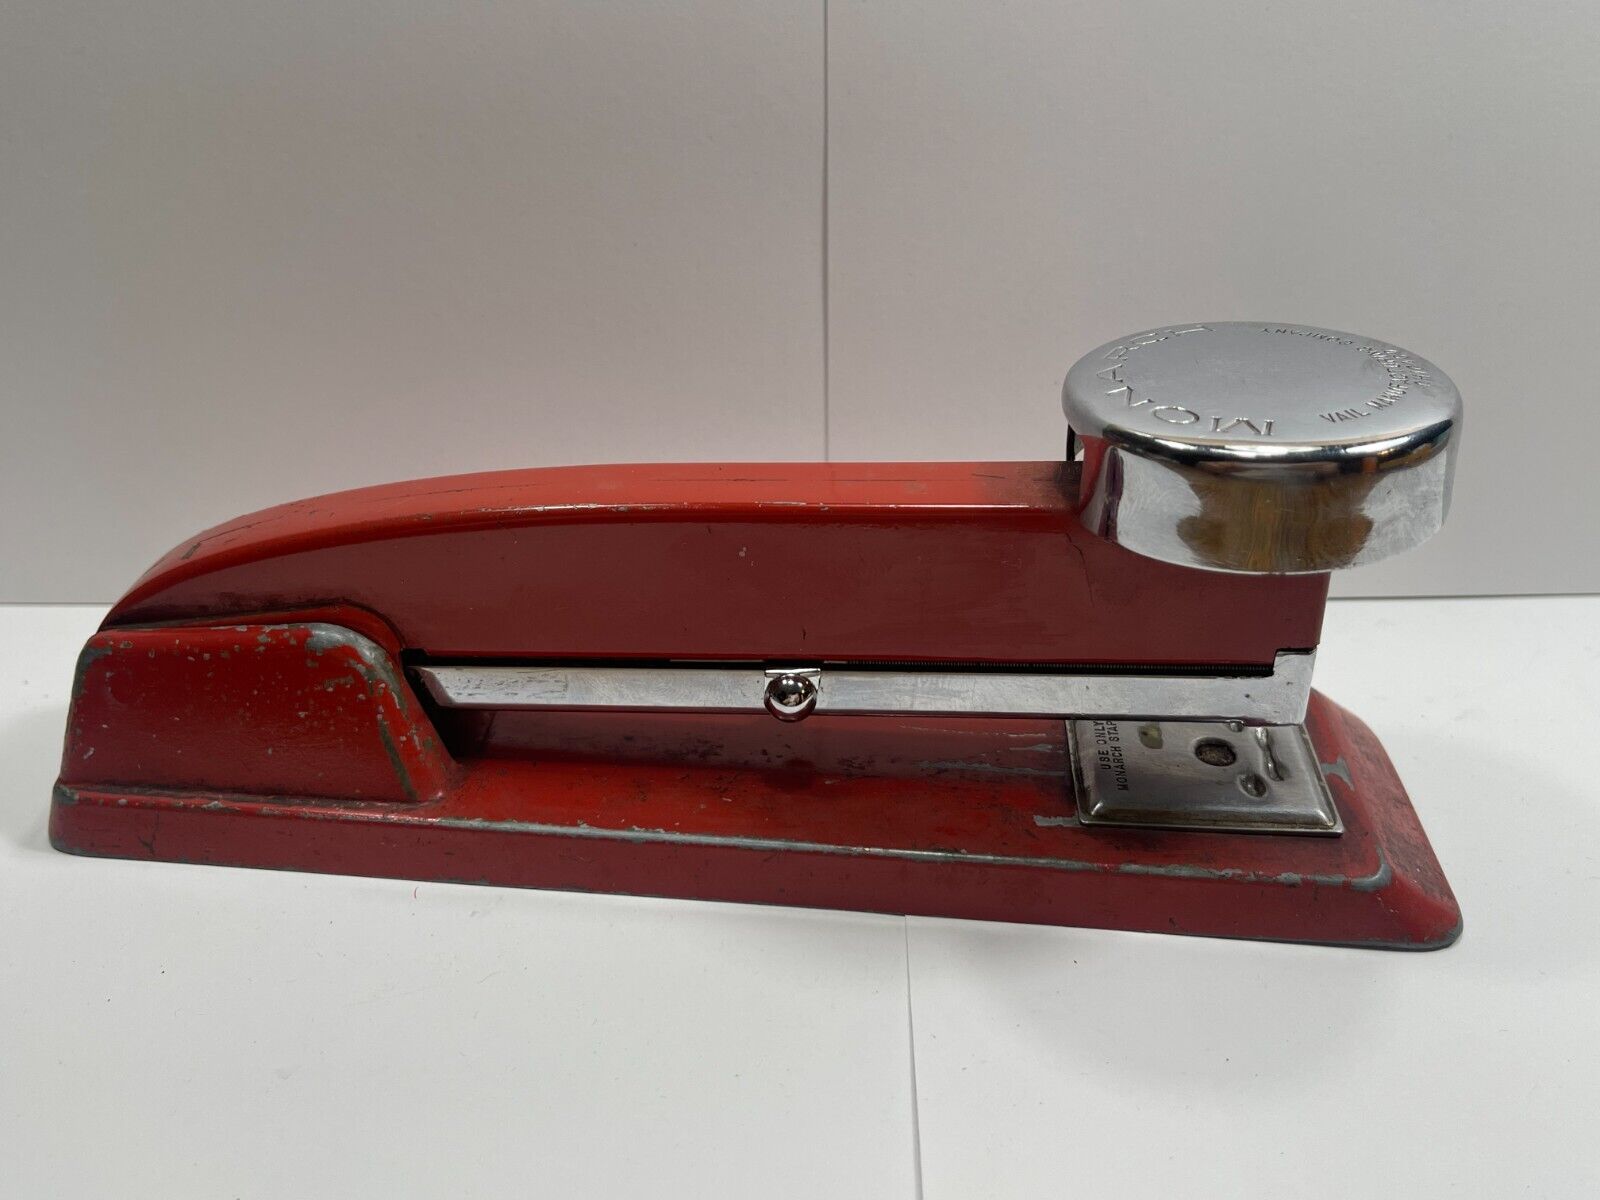 Vintage - Monarch Stapler Vail MFG Co Chicago USA - Retro Red Metal Industrial